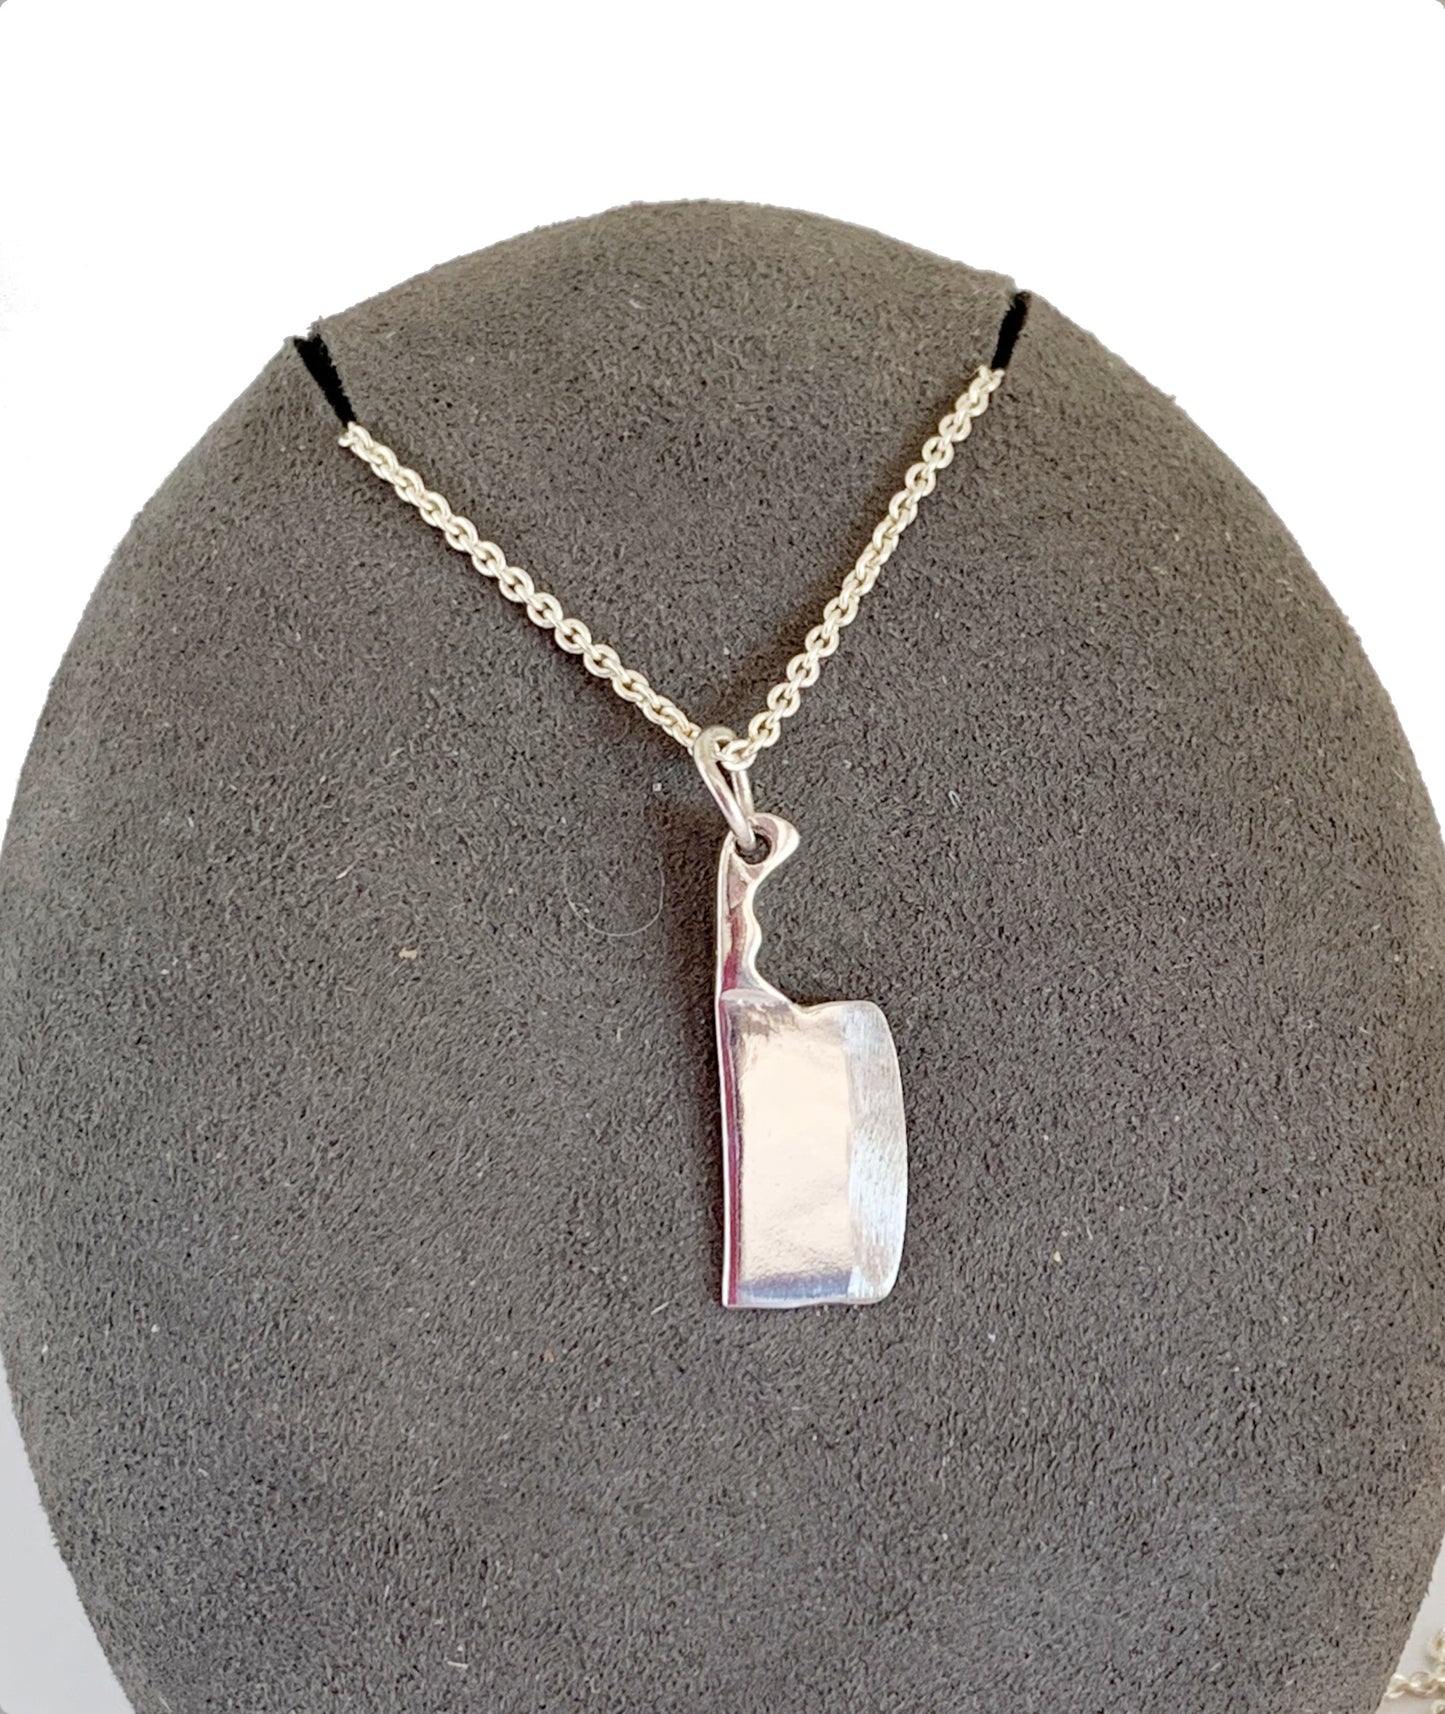 Chef's Cleaver Pendant Necklace in Sterling Silver